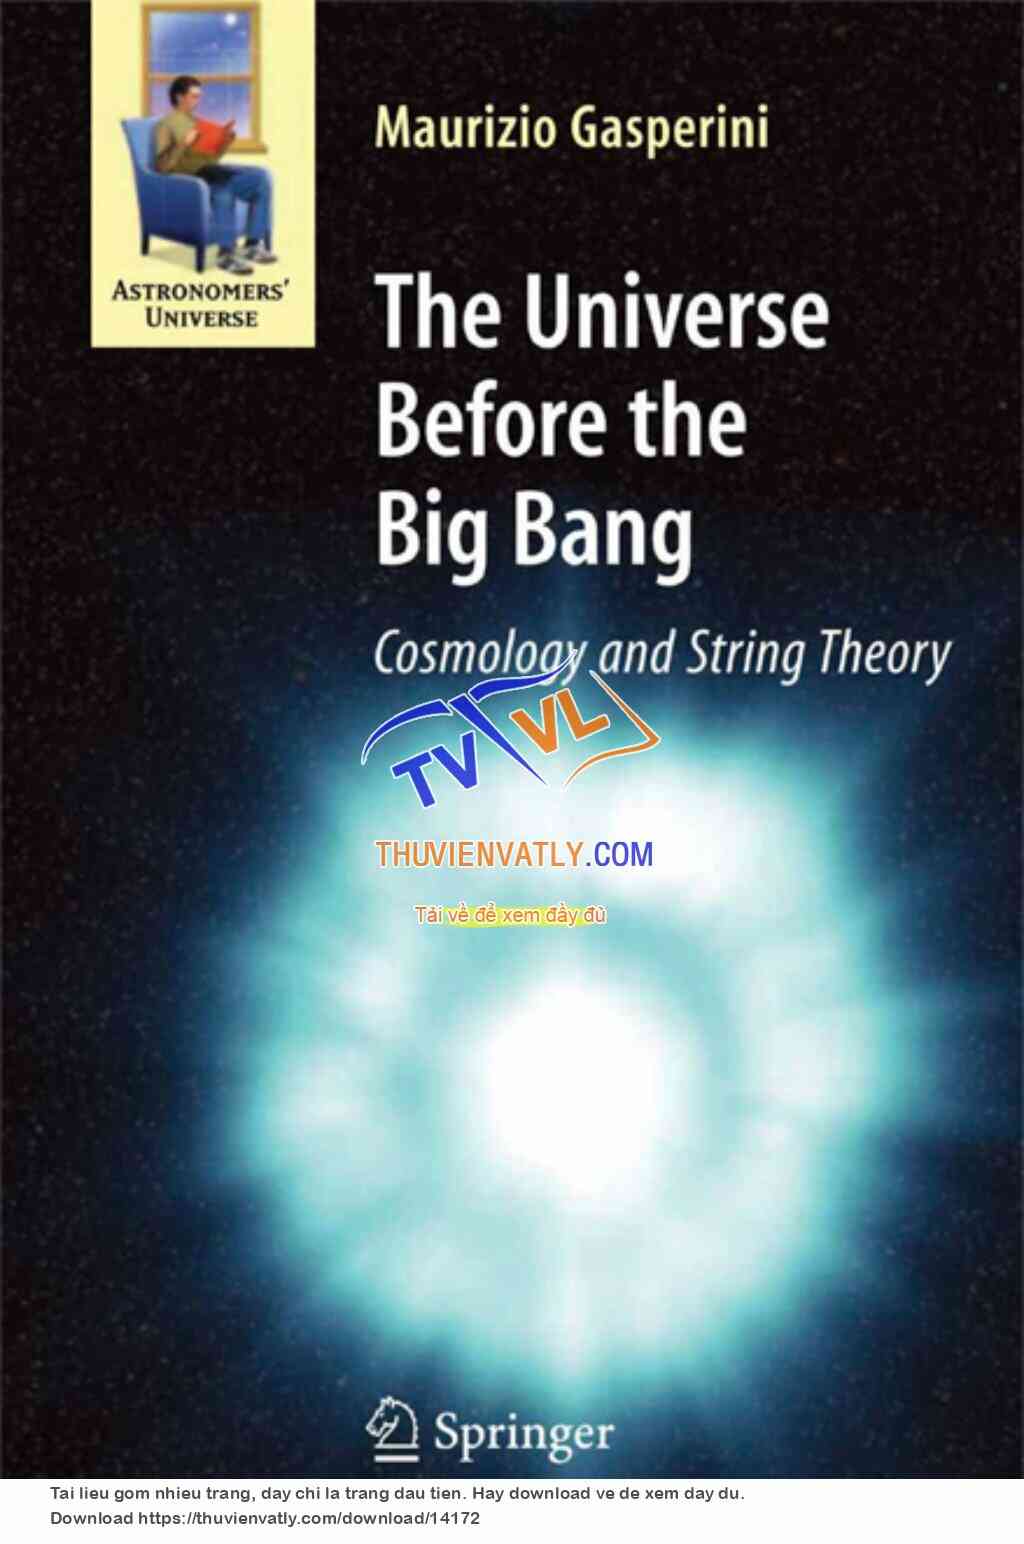 Astronomy - The Universe Before the Big Bang - Cosmology and String Theory